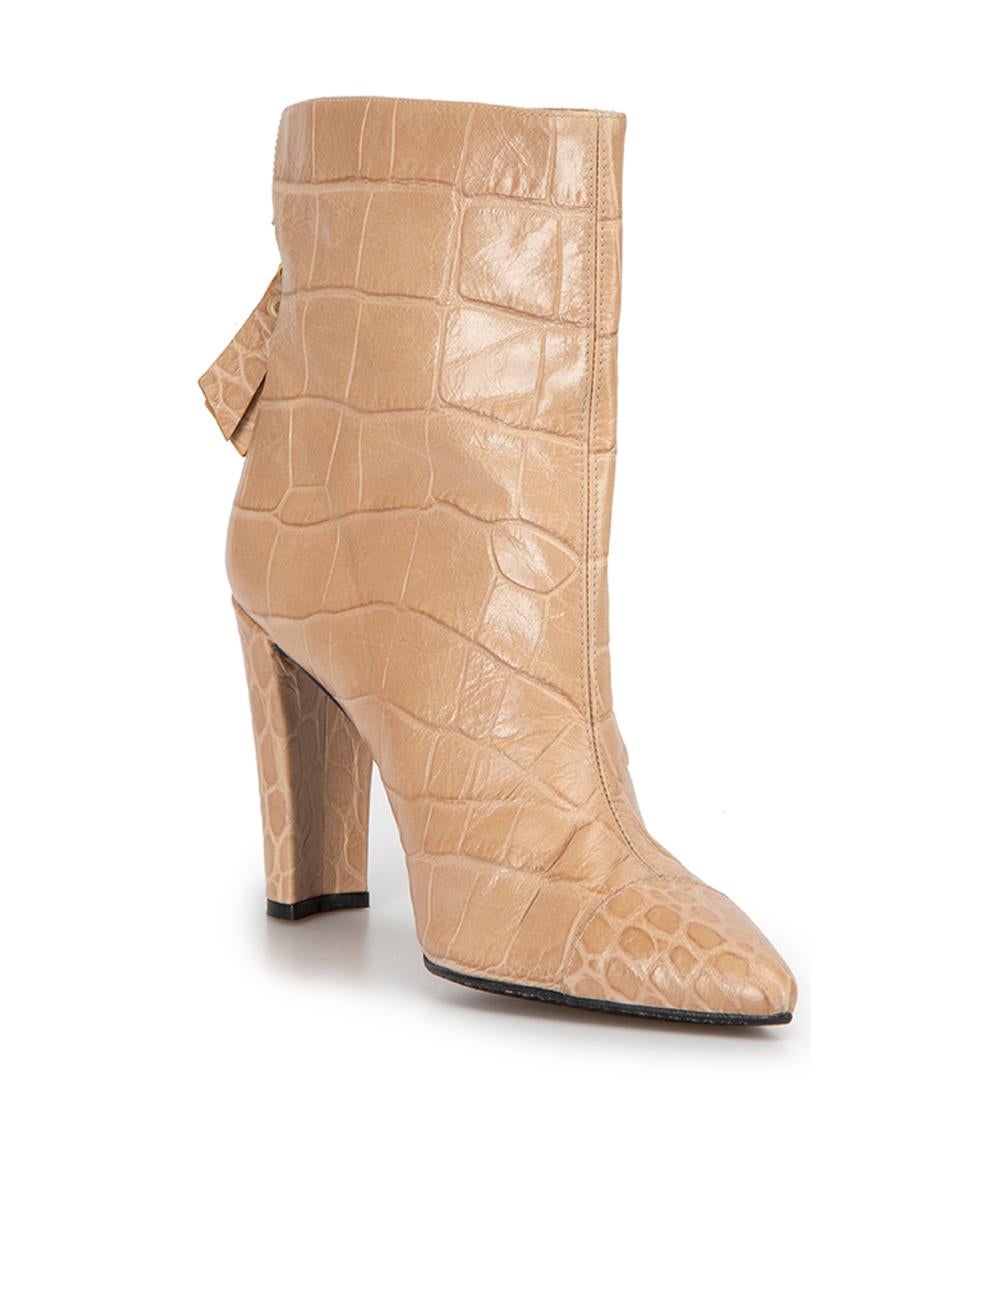 CONDITION is Very good. Hardly any visible wear to boots is evident on this used Stuart Weitzman designer resale item.



Details


Beige

Leather

Ankle boots

Crocodile embossed pattern

Pointed toe

High heel

Back zip closure





Made in